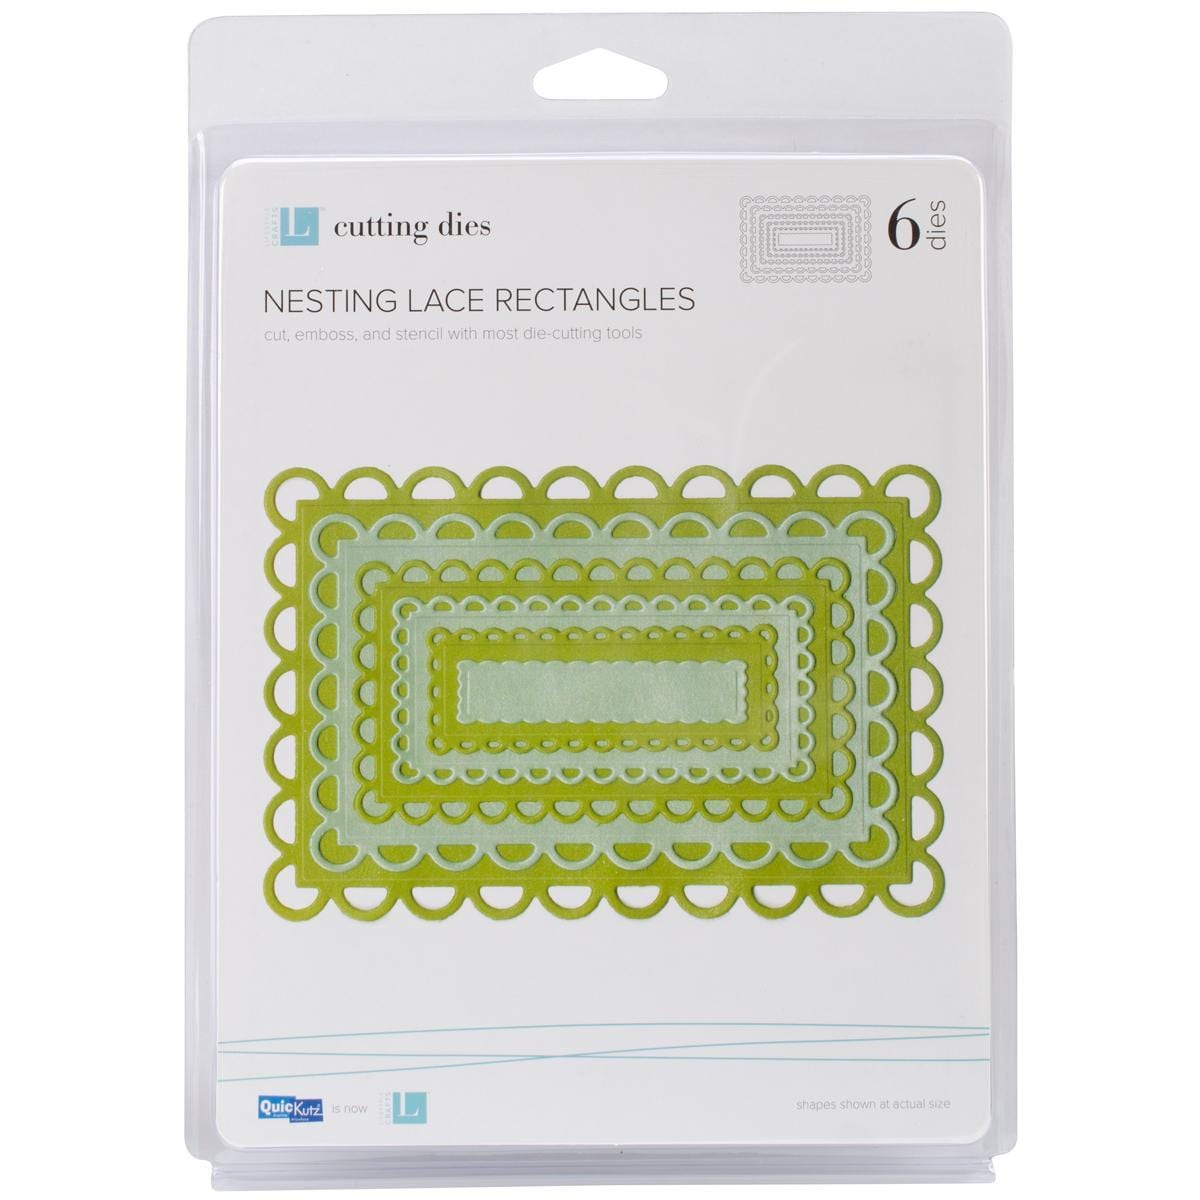 Lifestyle Nesting Dies  Lace Rectangles, 6 Dies